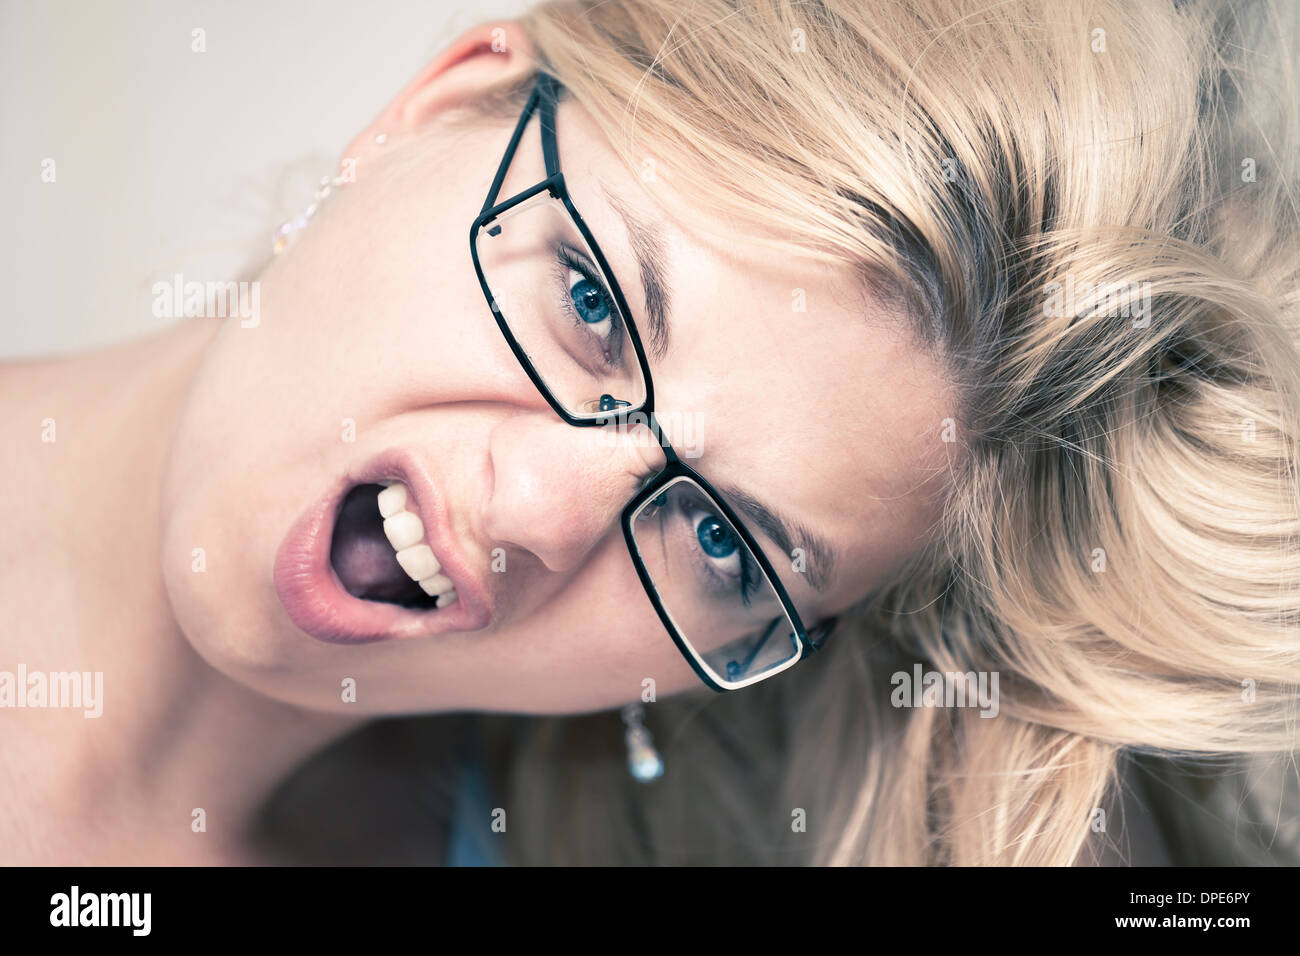 Closeup of excited woman face. Stock Photo